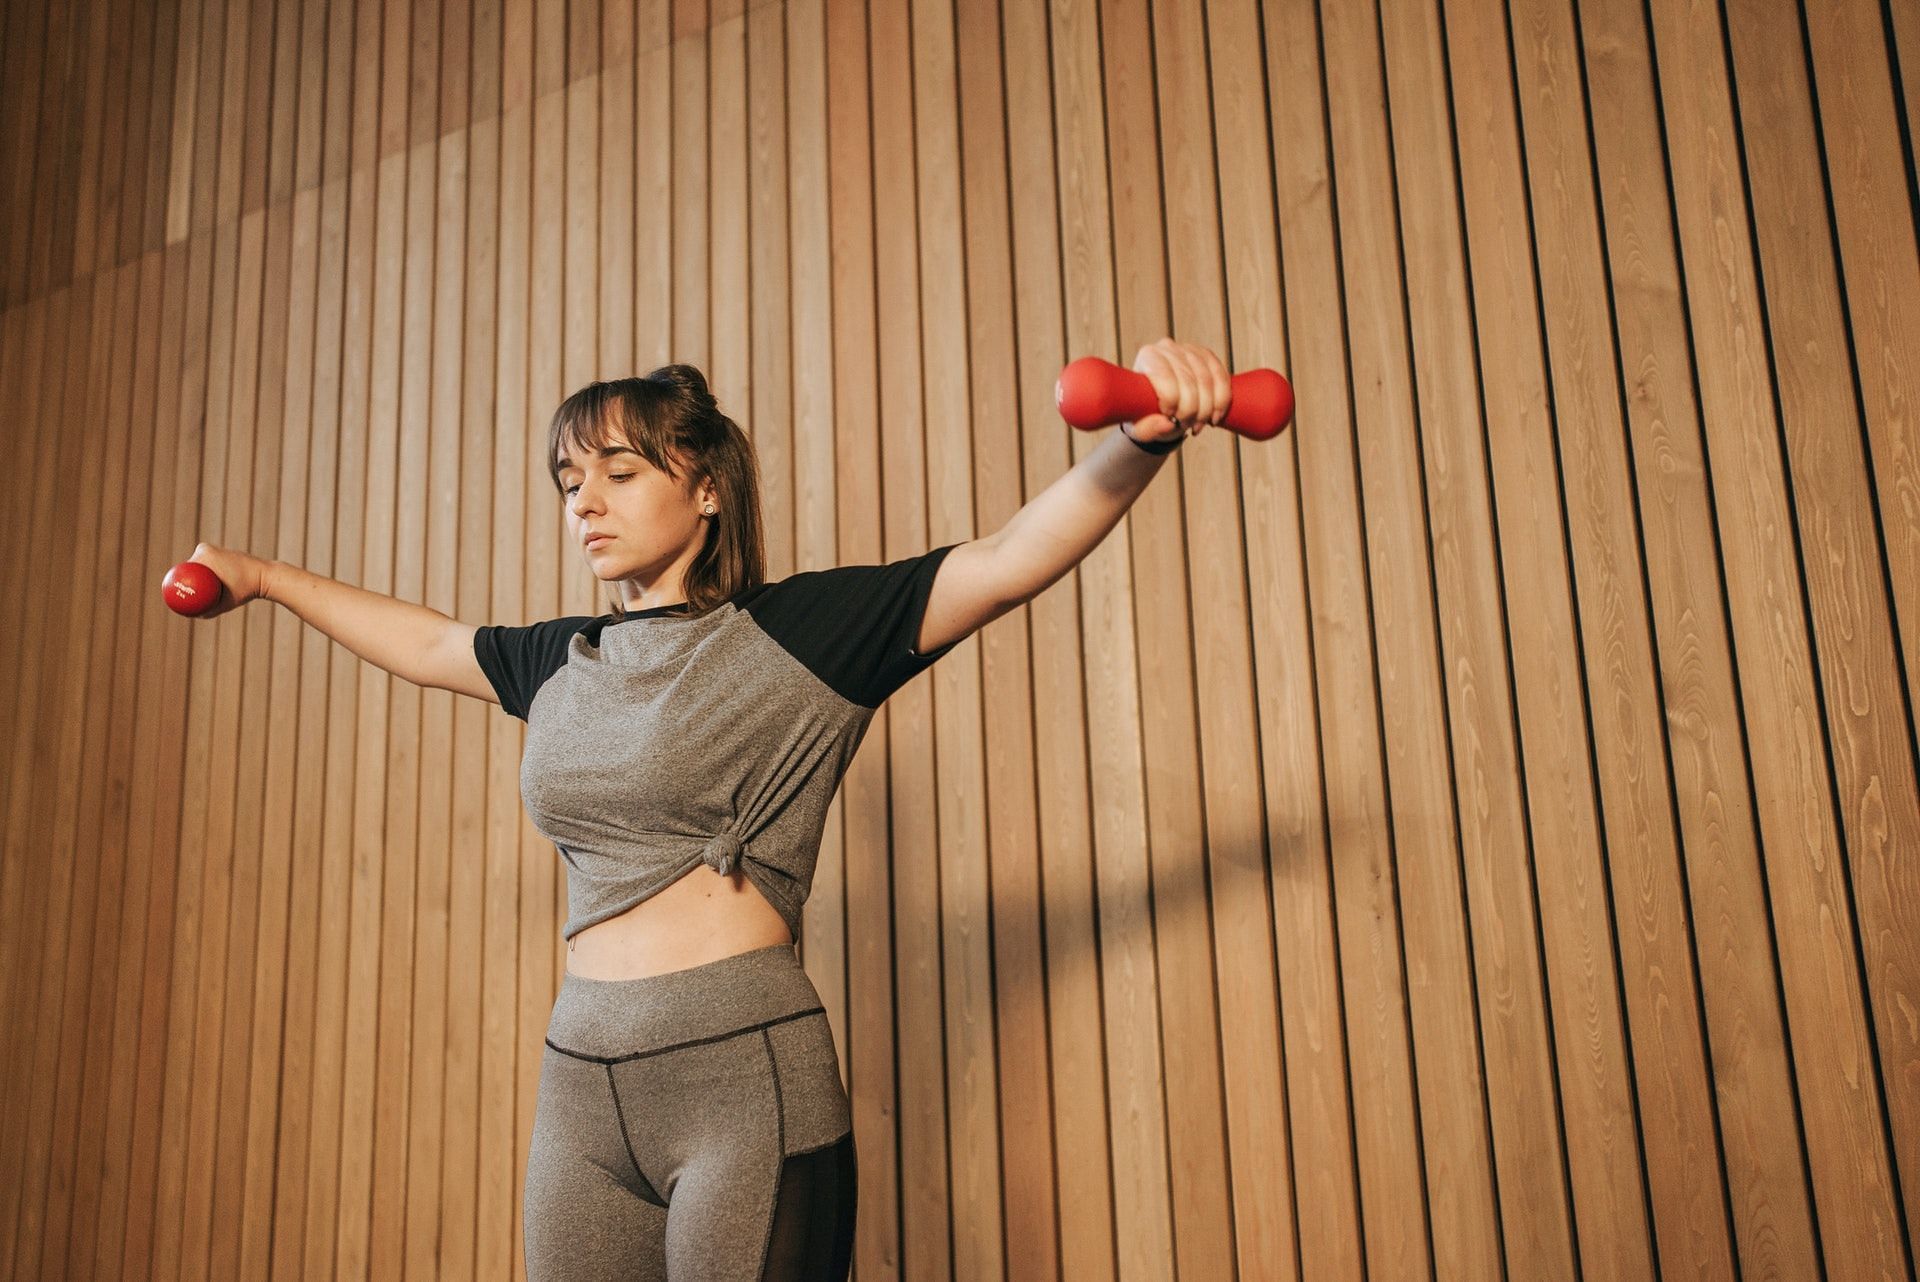 Lower pectoral exercises are very important for women. (Photo by Pavel Danilyuk via pexels)